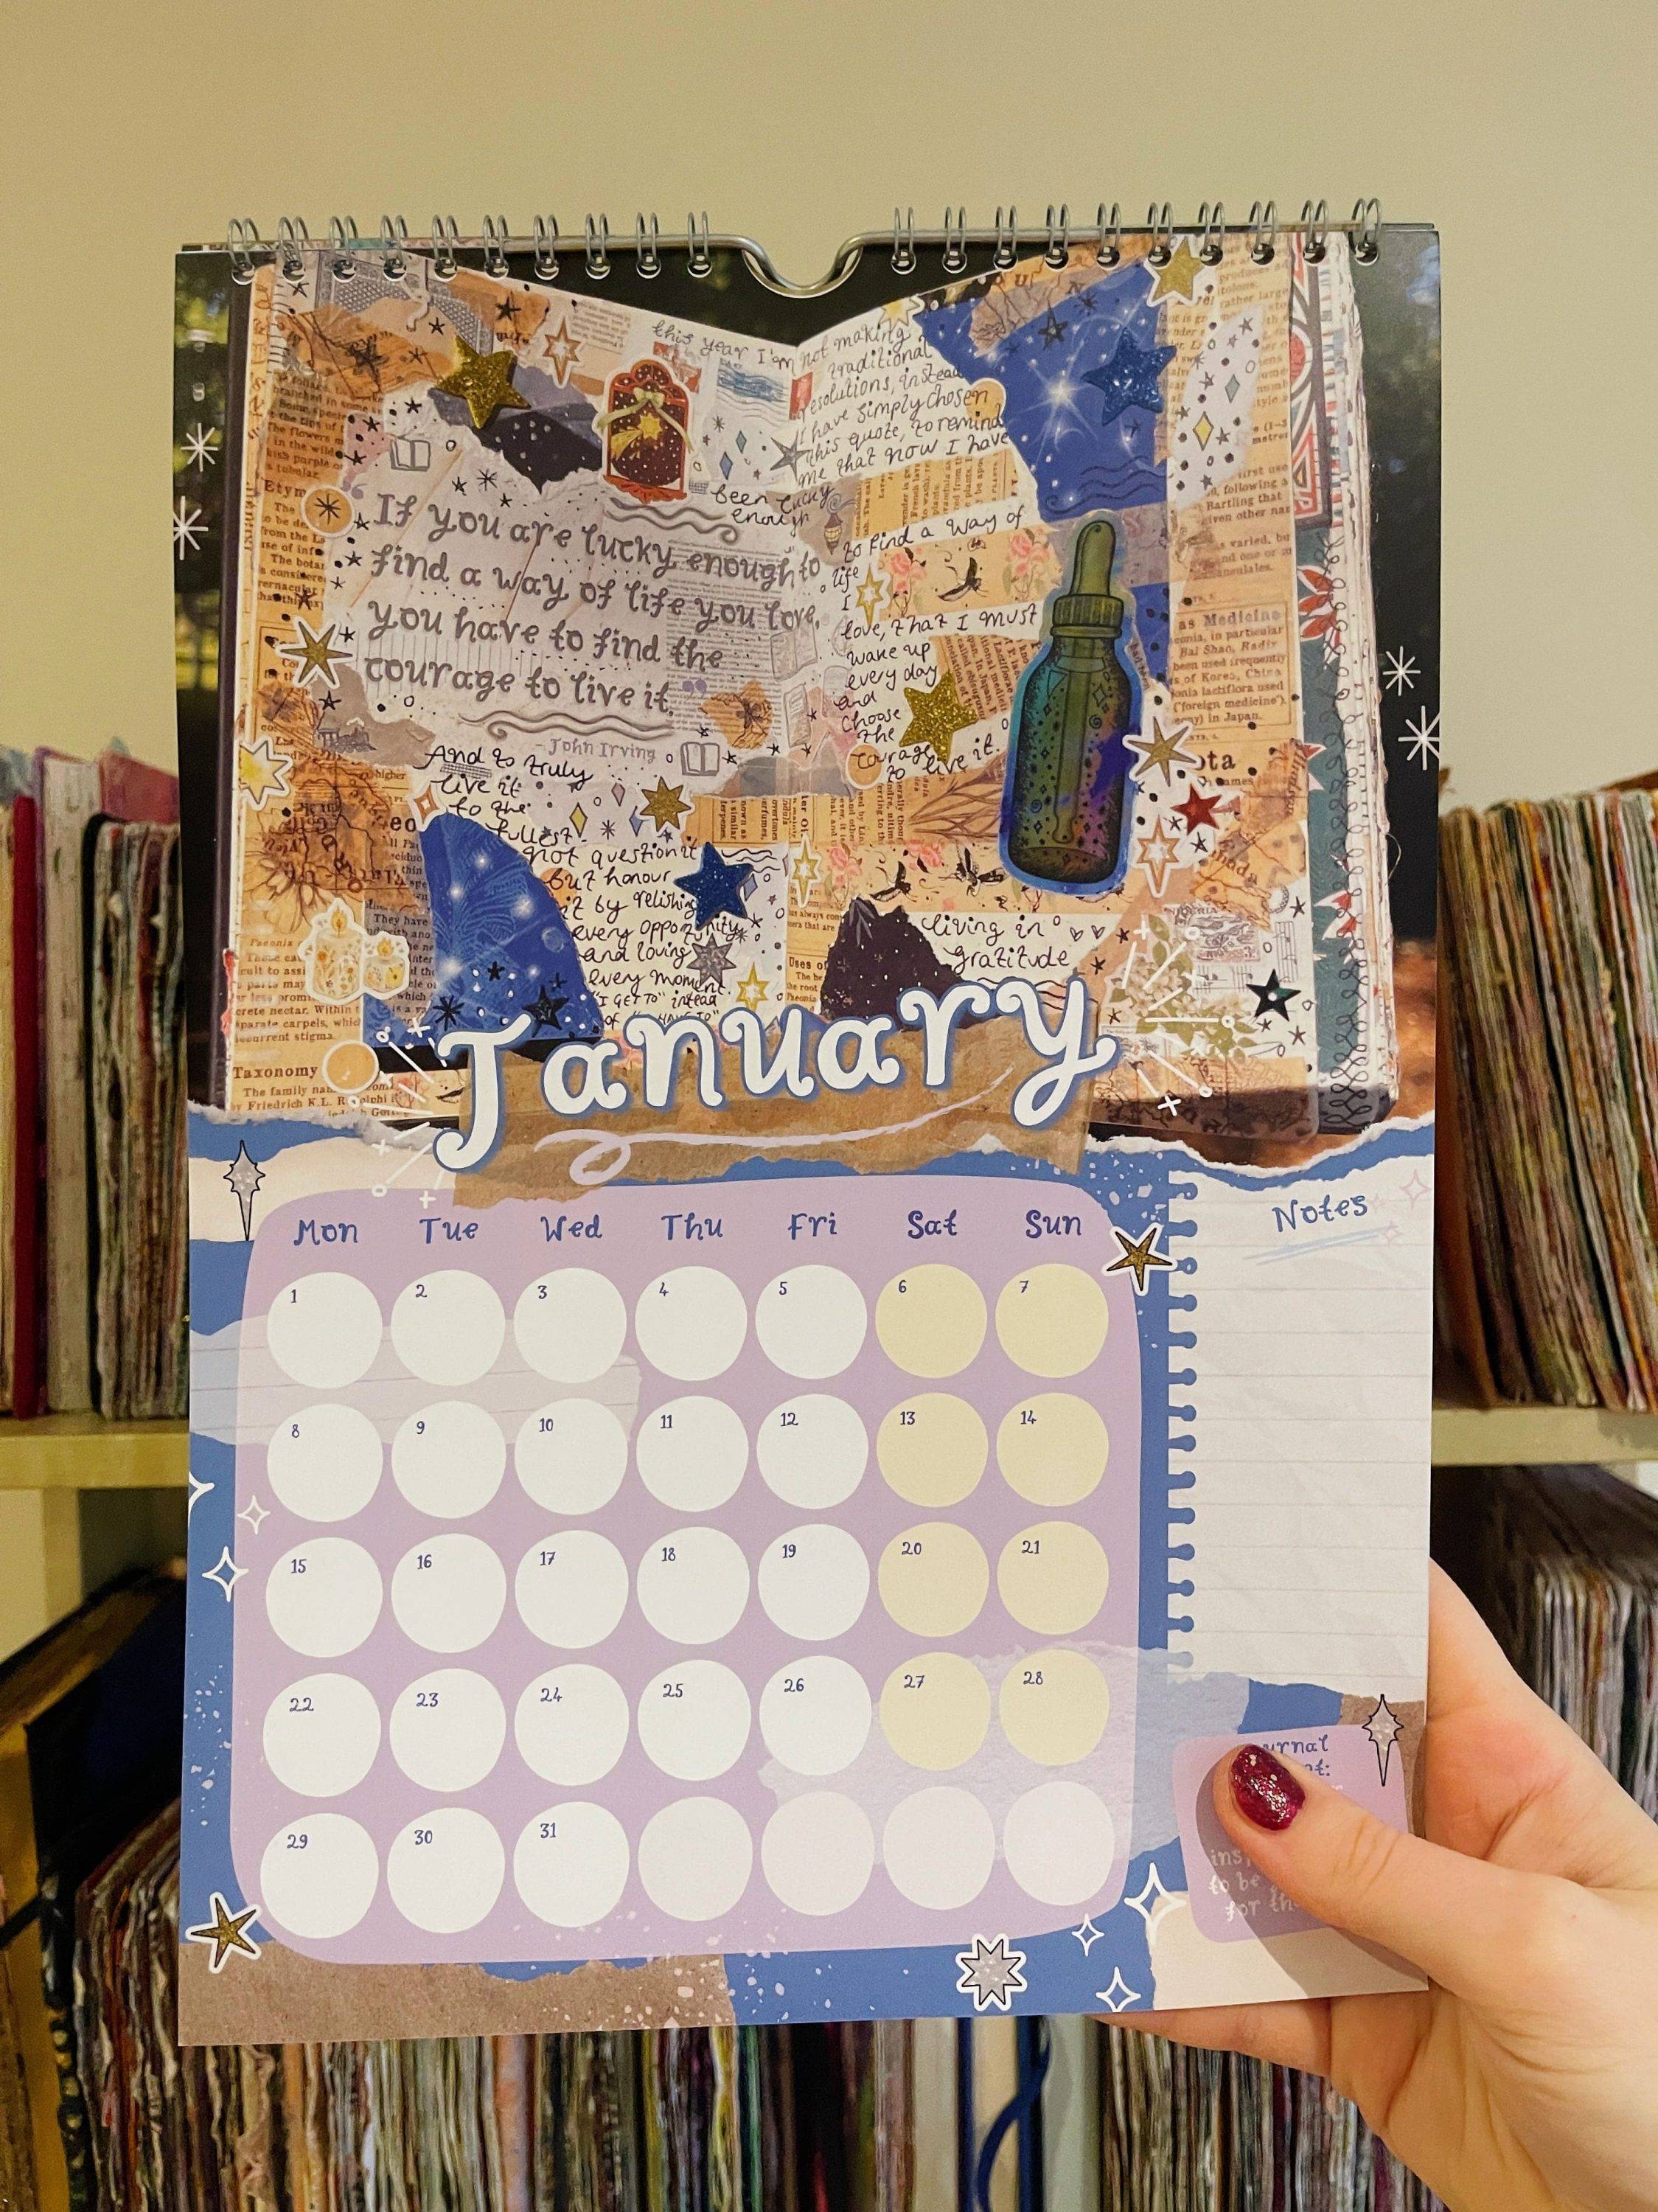 2024 art journal calendar – art journal ideas inspiration and prompts for the yeat – creative journaling gift by Kia Creates – wall calendar (7)